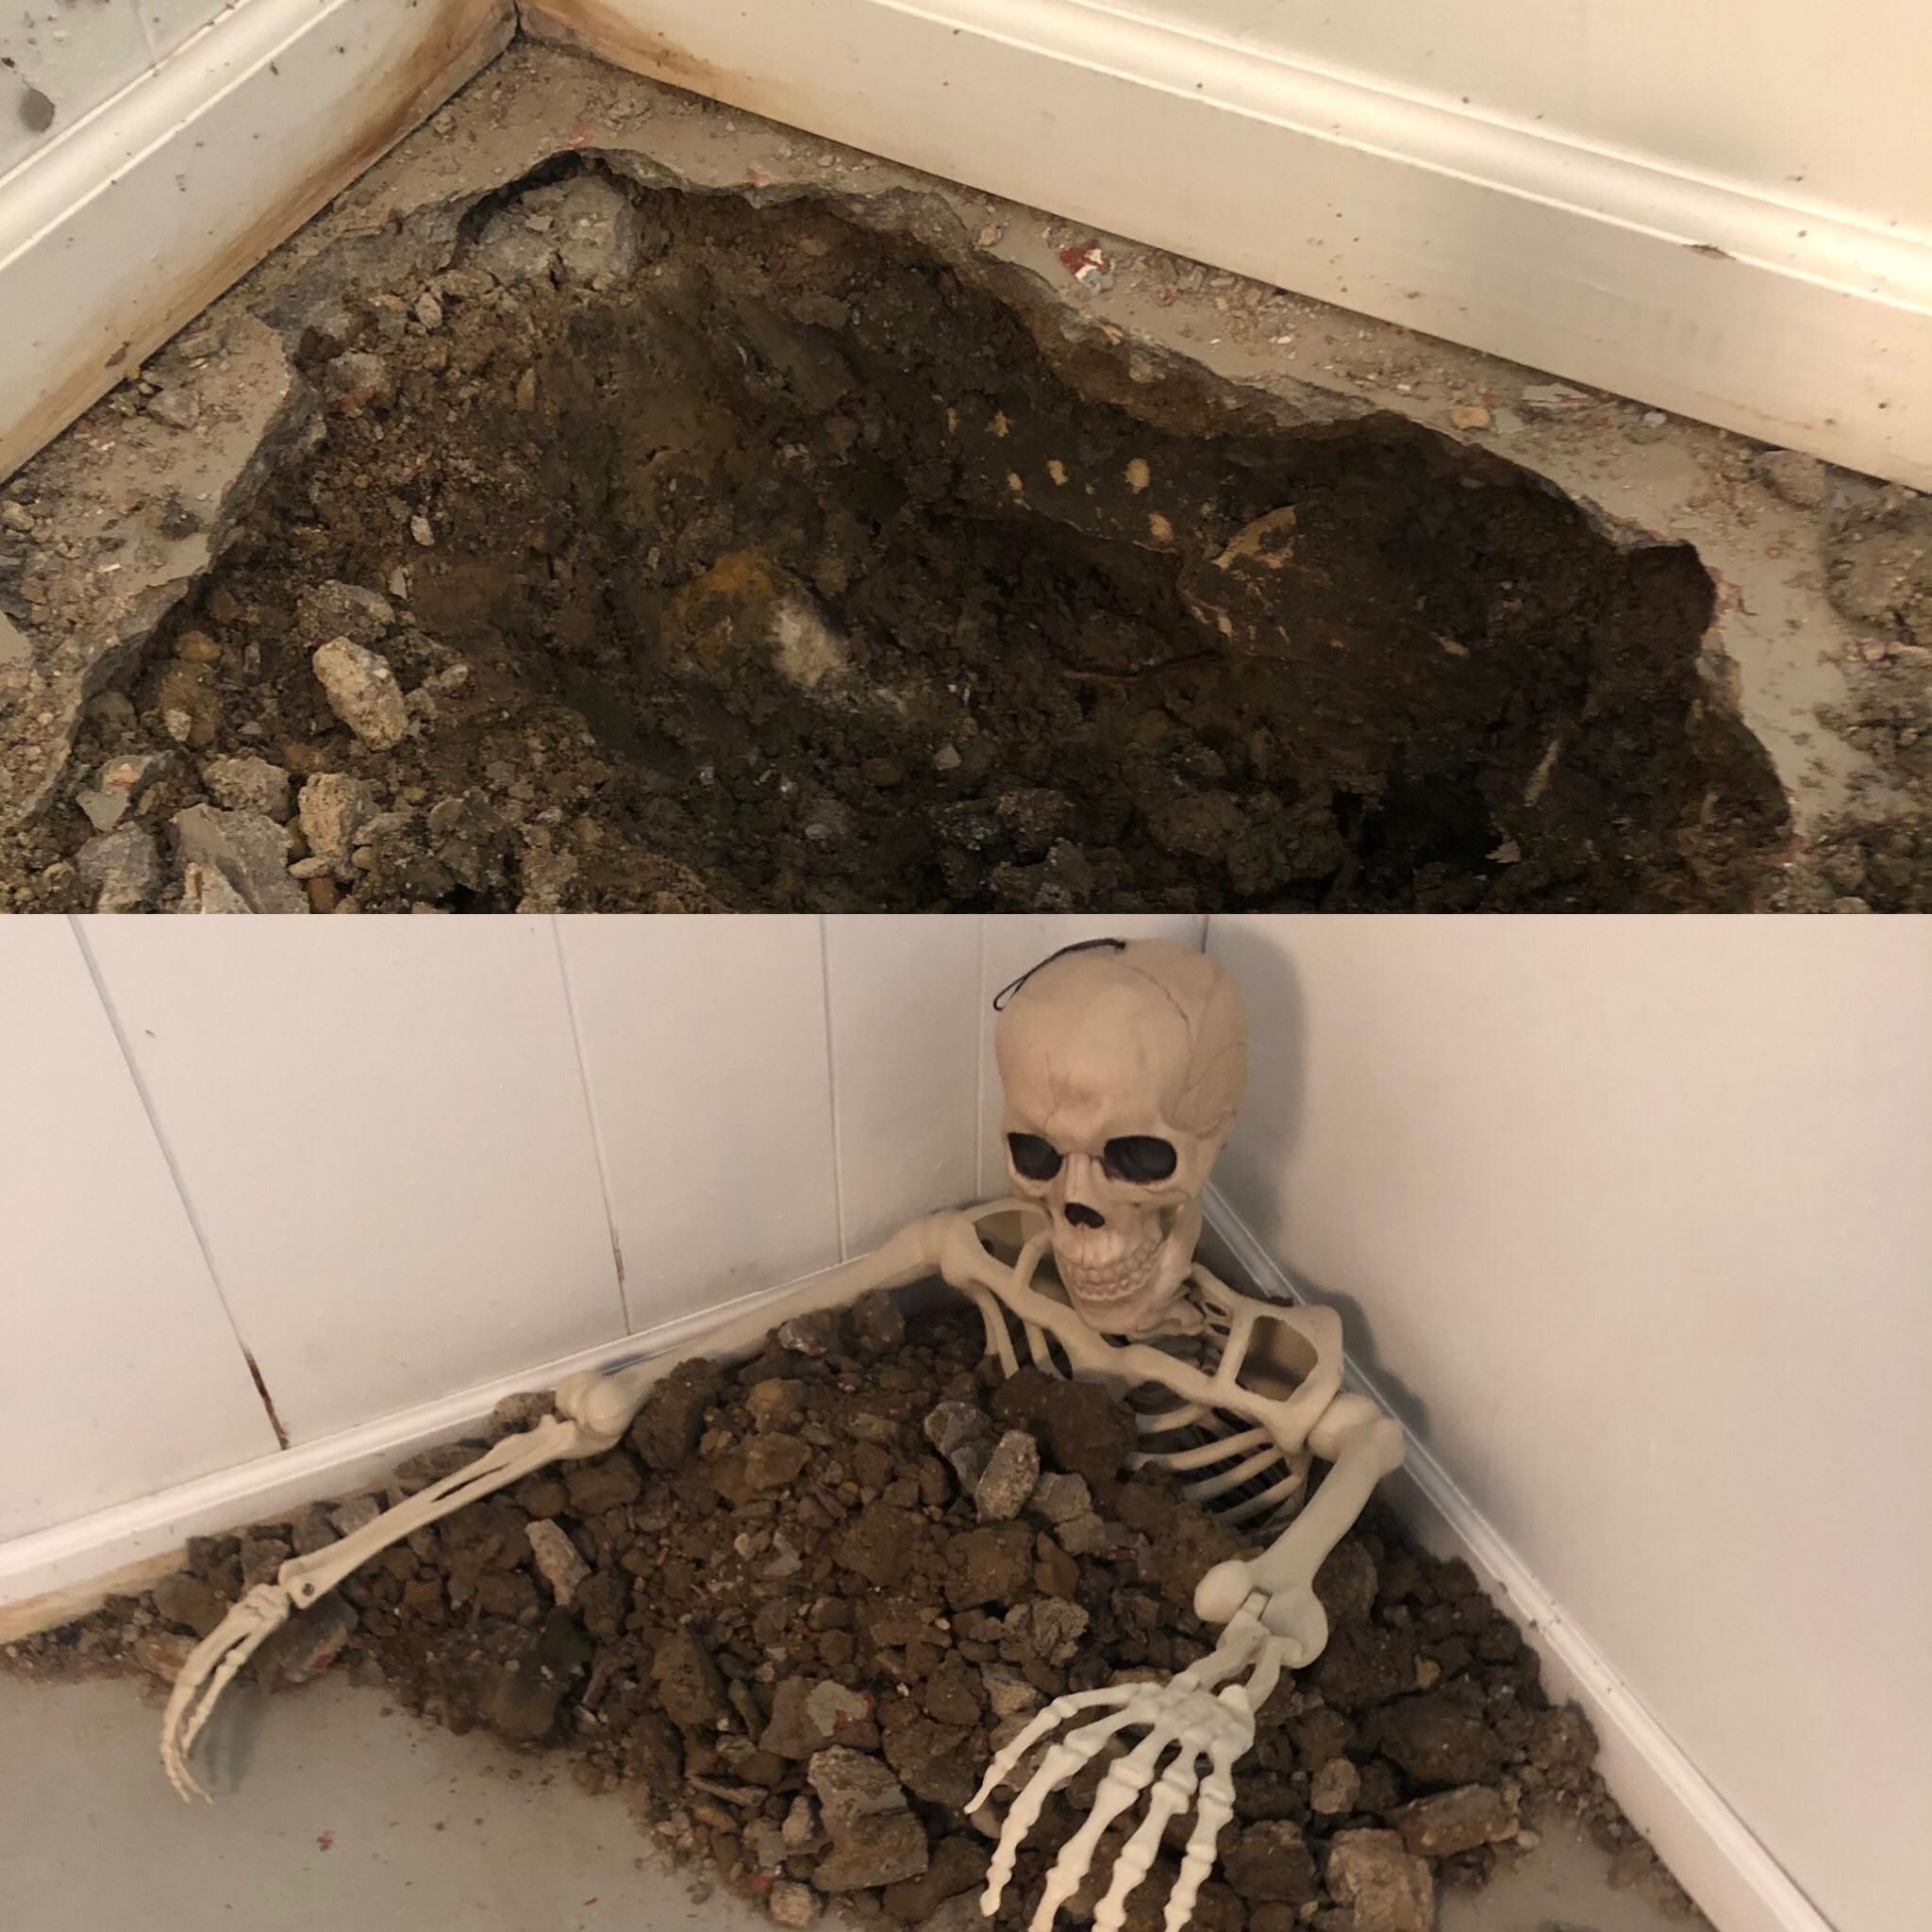 Prior to renovation, a client asked me to fill a hole we made after inspecting the foundation so nobody would fall in it.